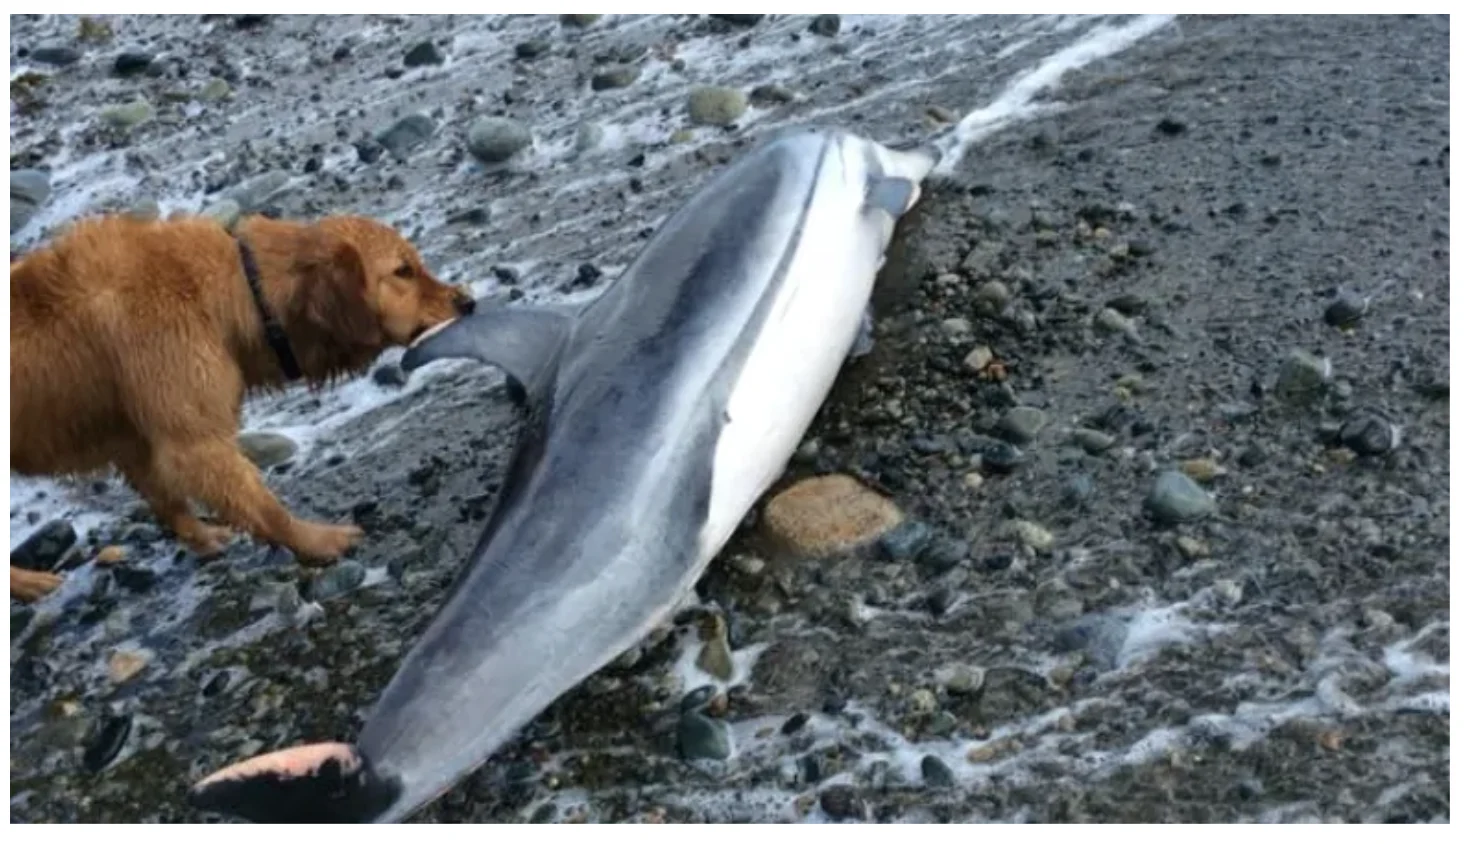 CBC: A dog on a beach walk sniffs a striped dolphin found floating in the waters off Haida Gwaii. Fisheries officials say it is unusual for this kind of dolphin to be found so far north. (Submitted by Alex Rinfret)